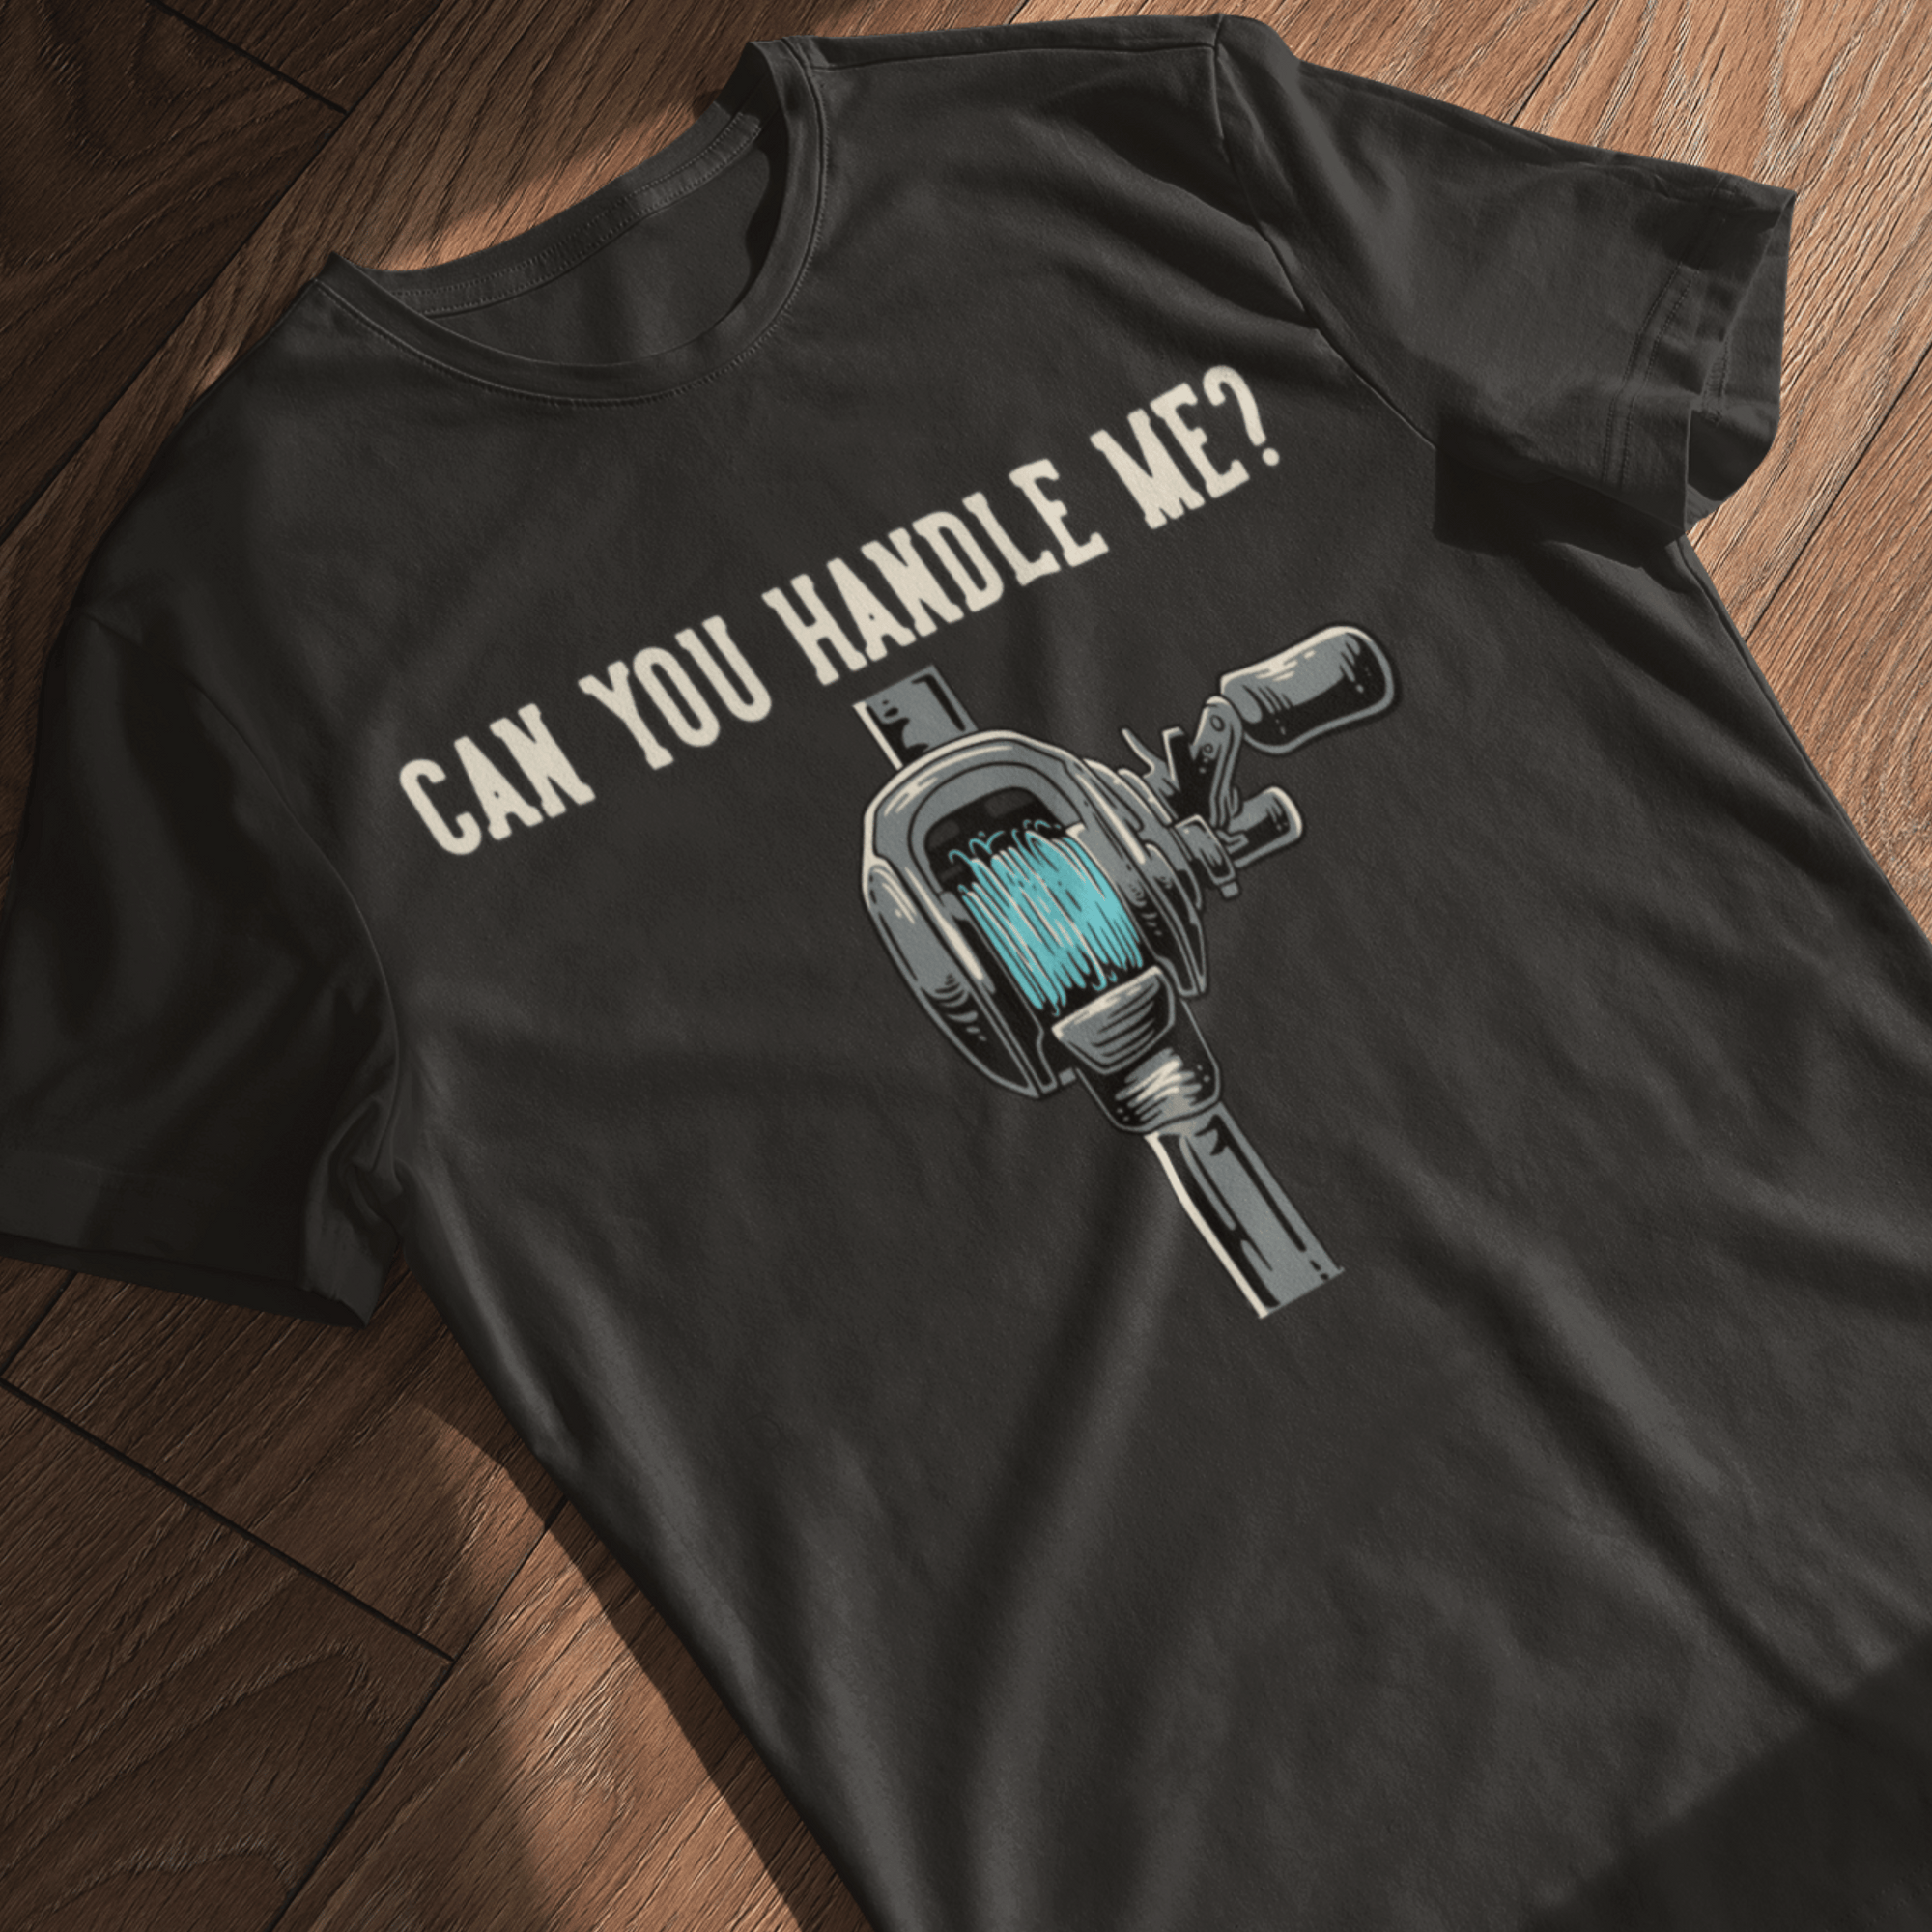 Can You Handle Me? T-Shirt